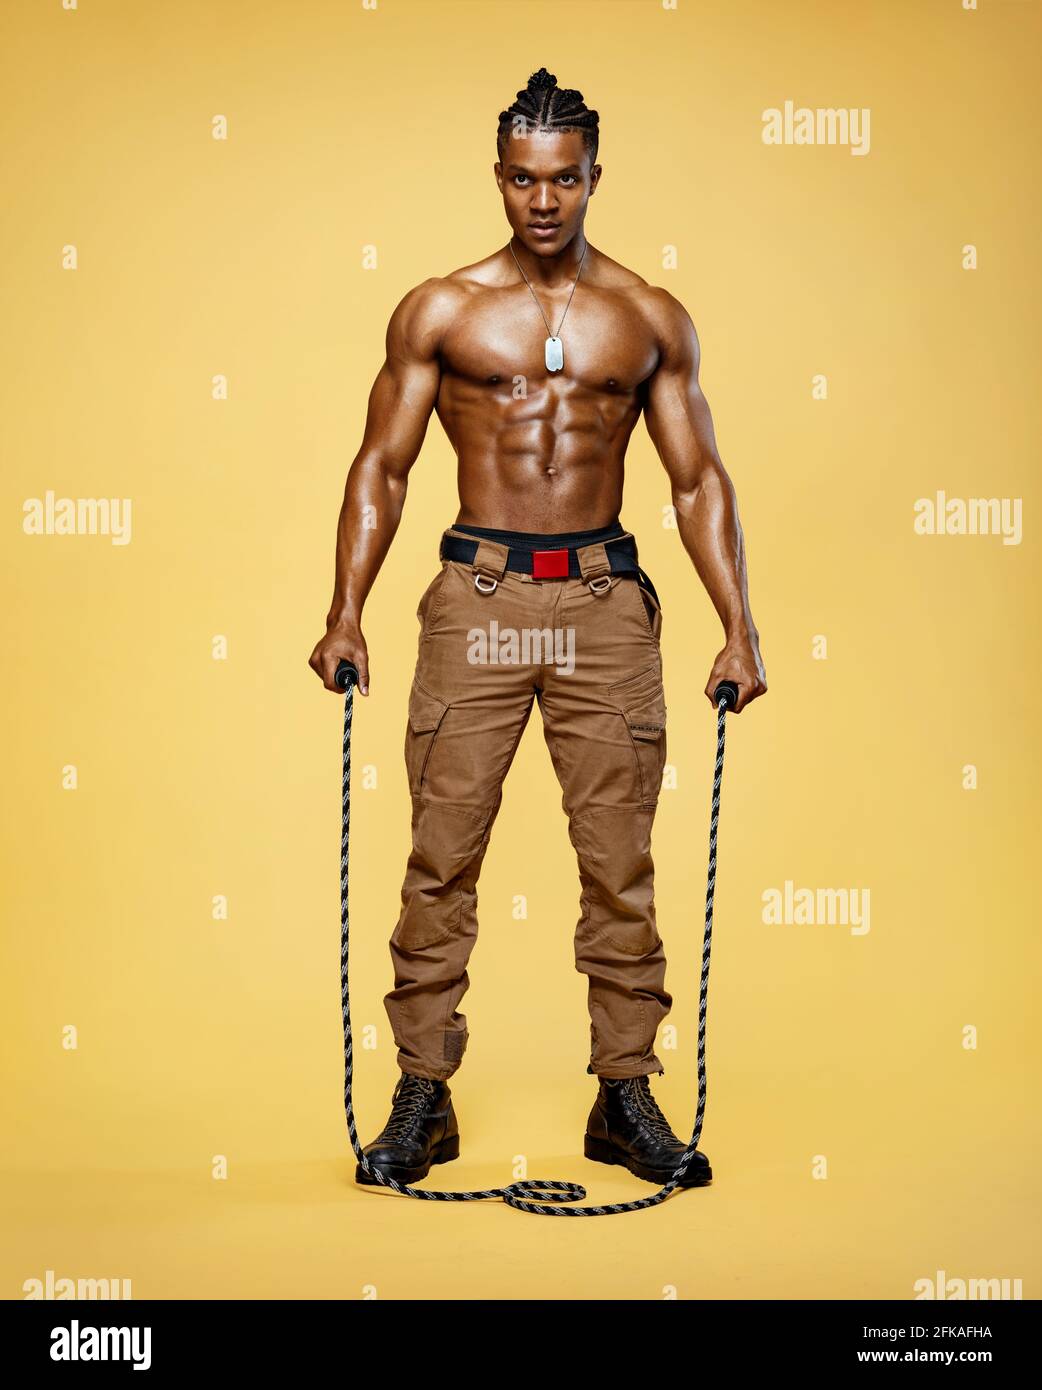 Tired man with a skipping rope. Photo of sporty muscular man with perfect body on yellow background. Best cardio workout. Stock Photo